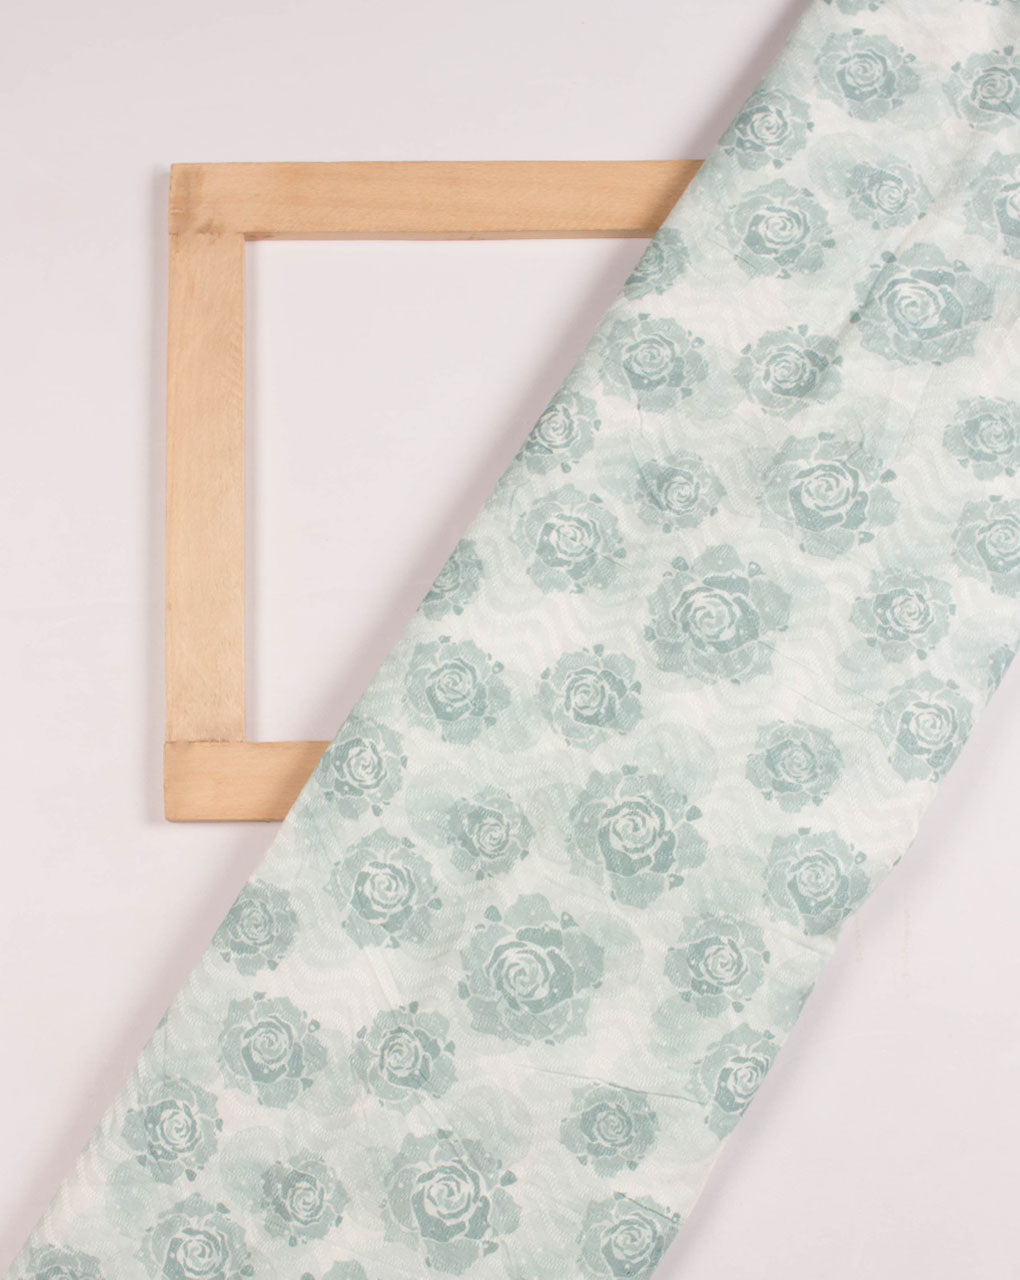 Off-White Grey Floral Digital Print Dobby Cotton Fabric - Fabriclore.com